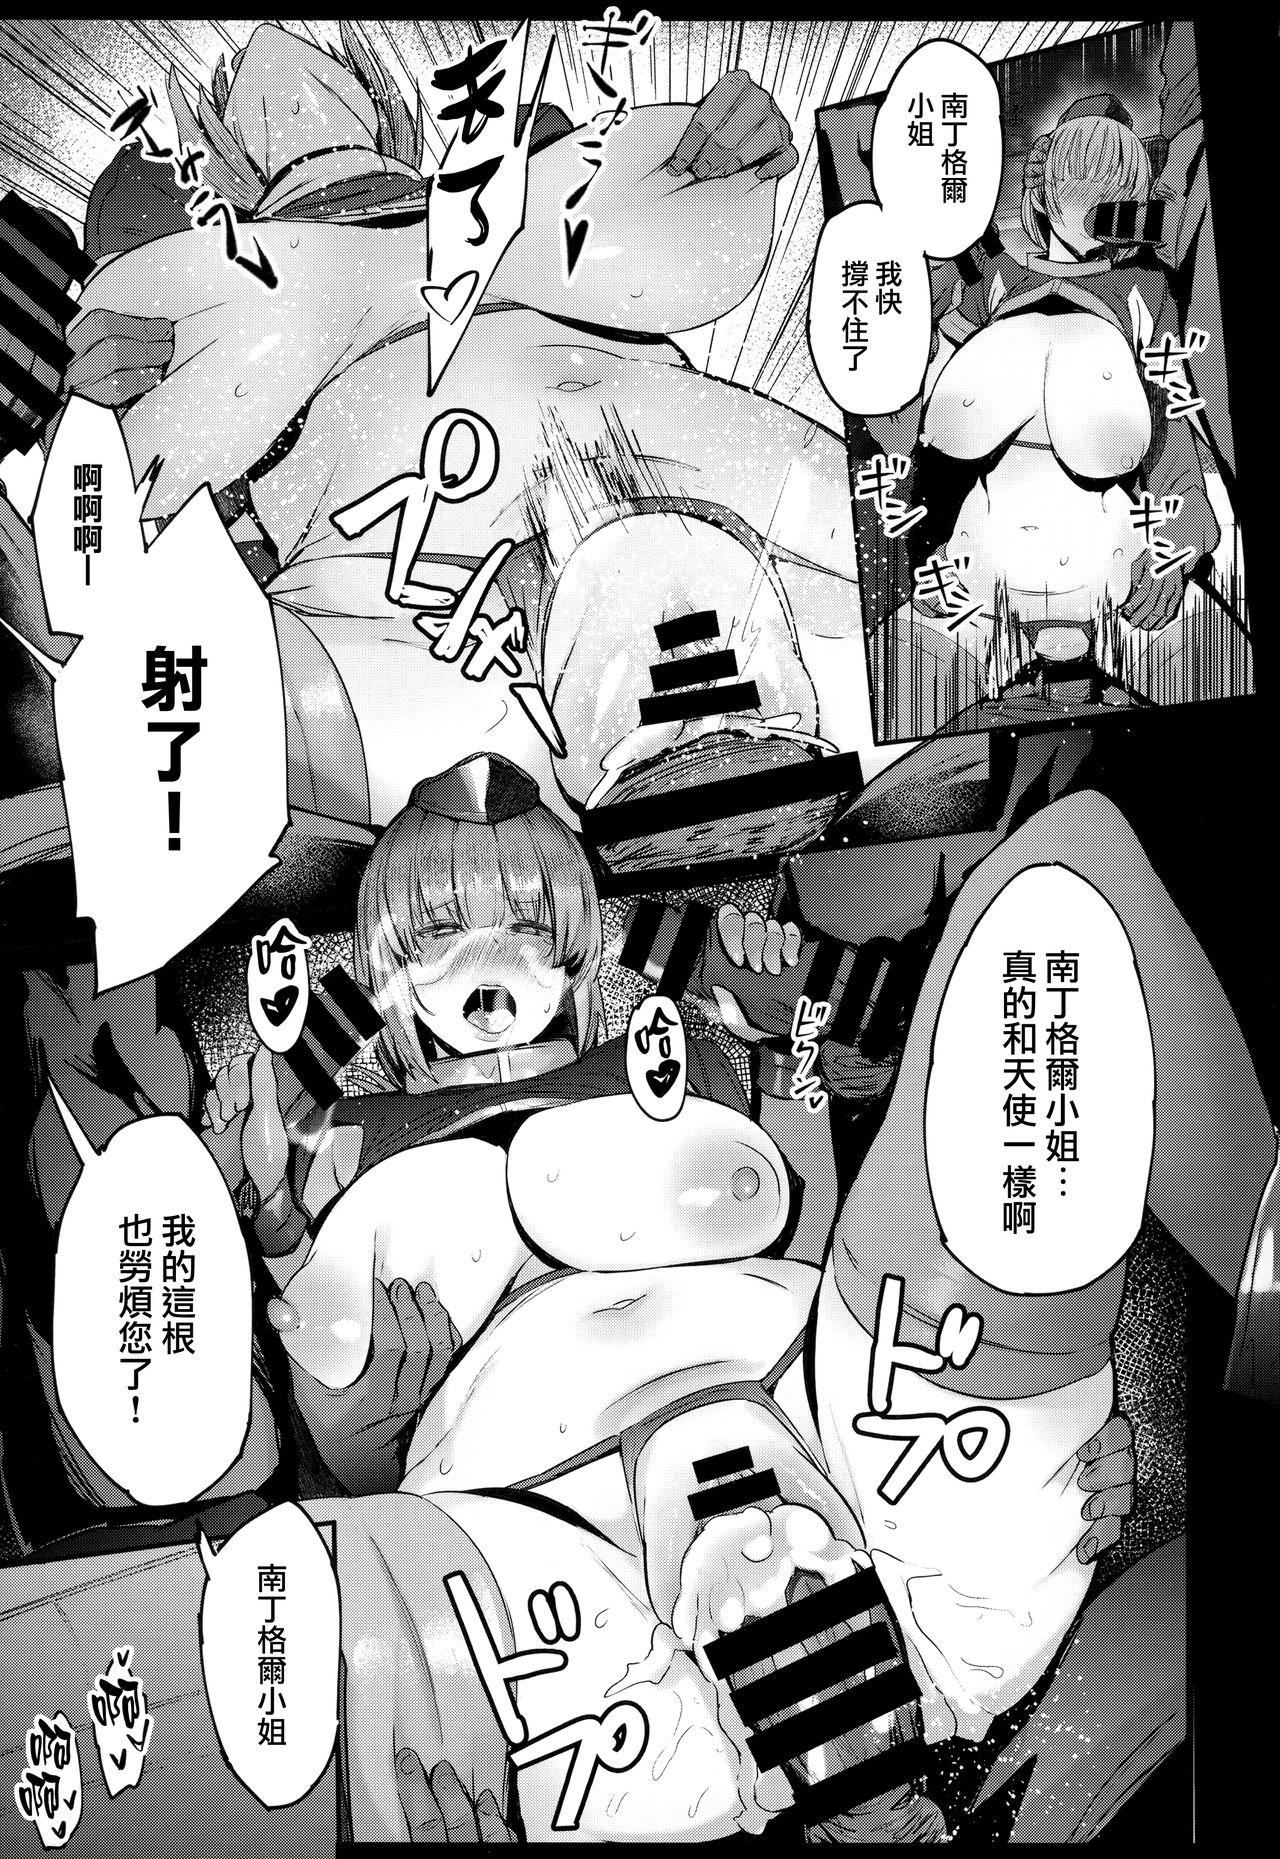 Moaning Chaldea Ninshin Club - Fate grand order Doggy Style Porn - Page 9